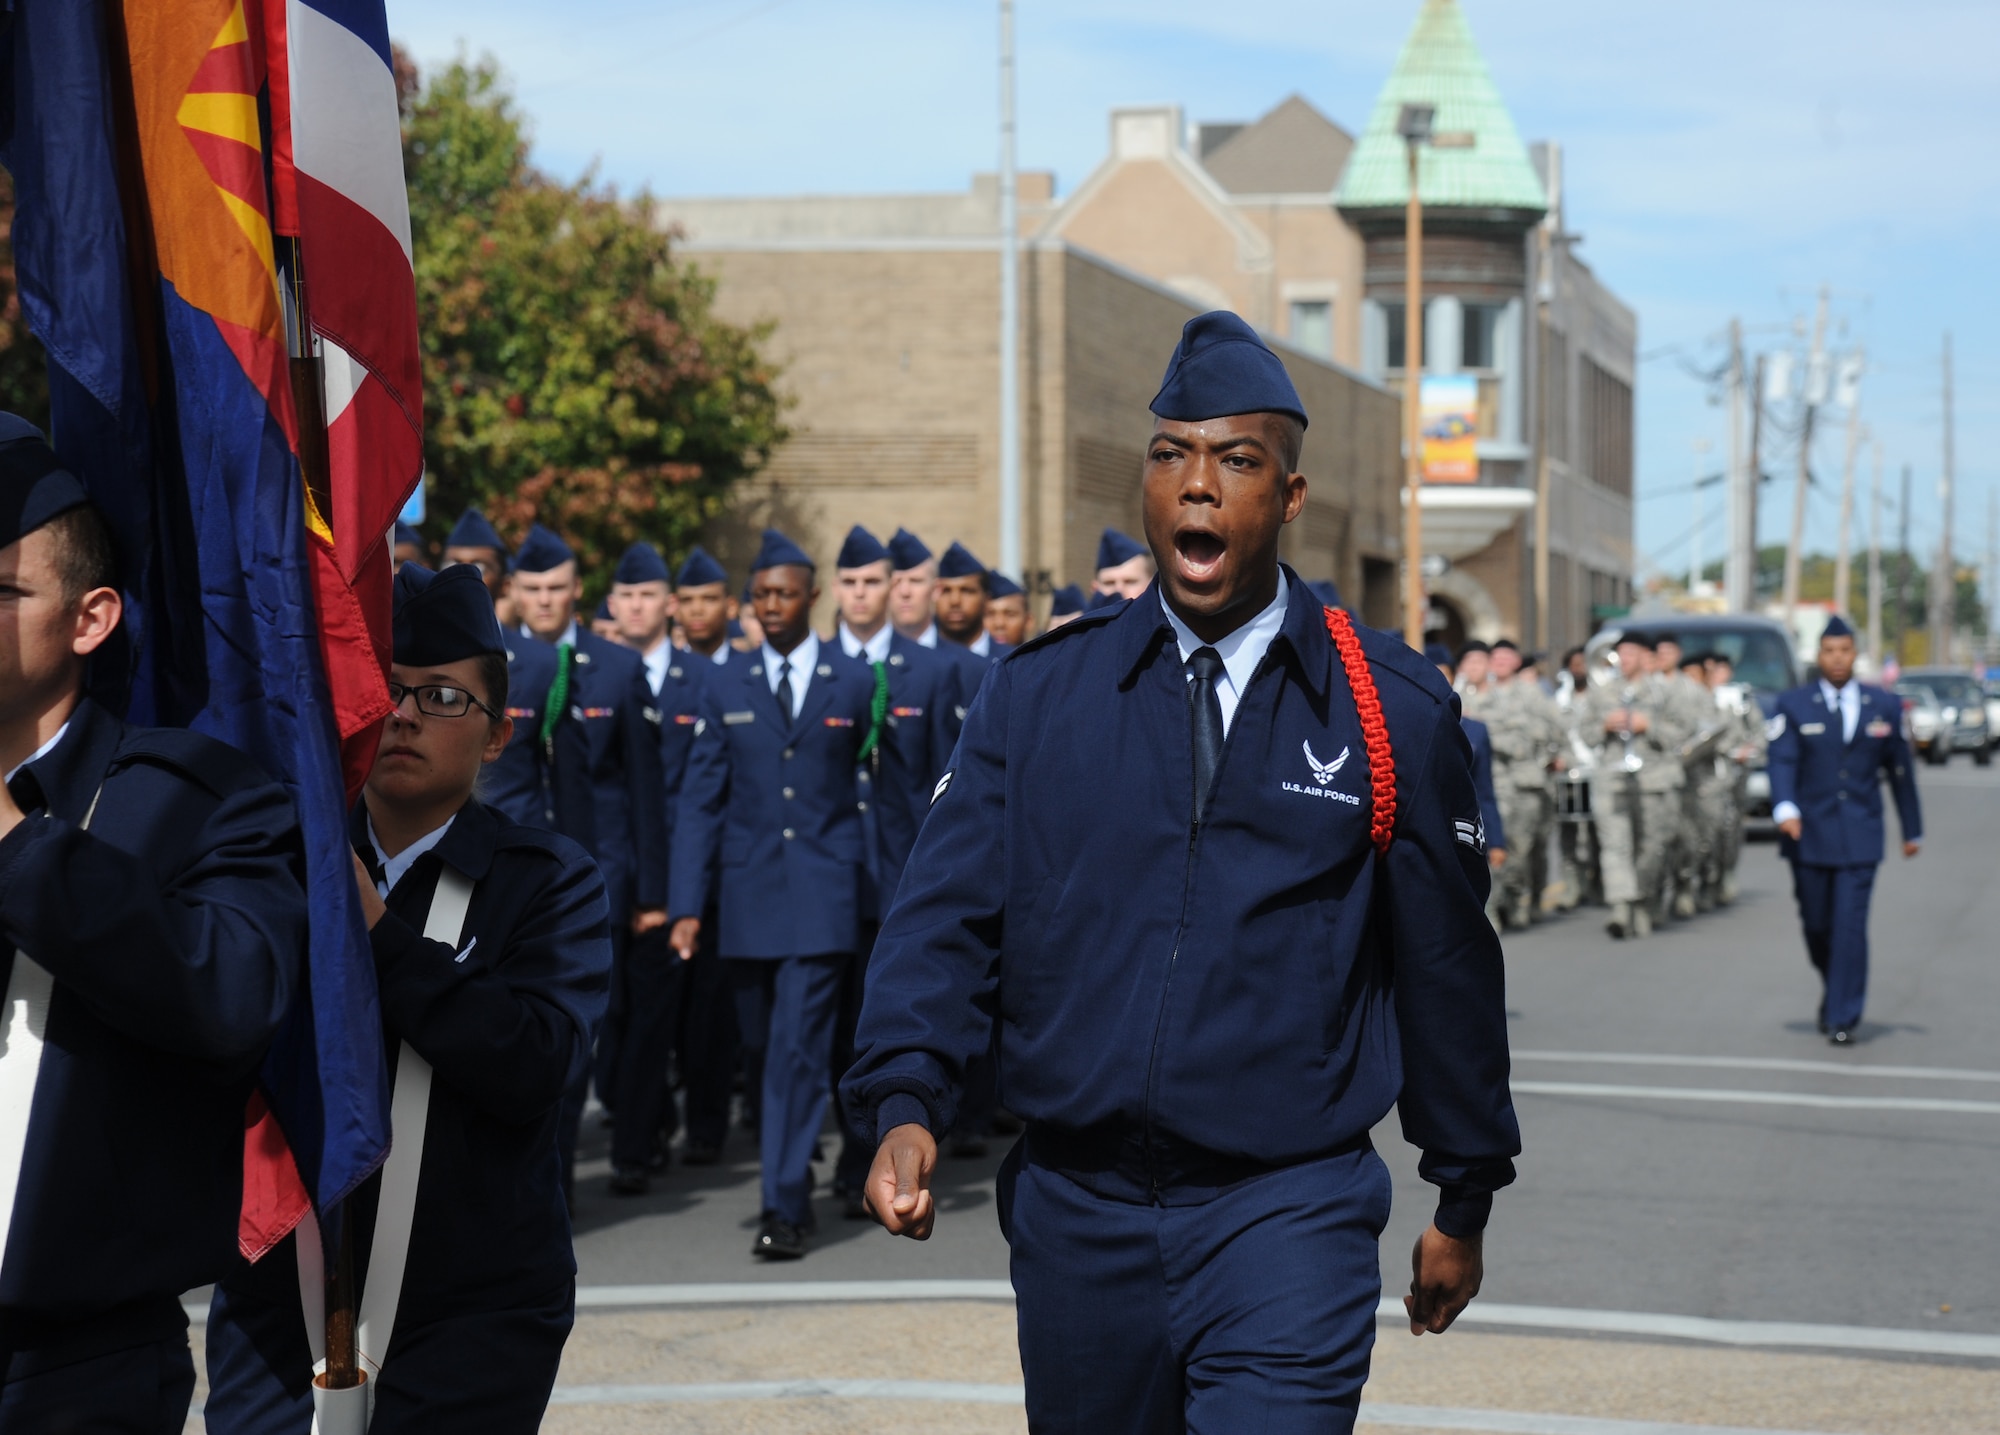 Airmen 1st Class Michael Barnes, 338th Training Squadron student, calls cadence for Airmen carrying the 50 State Flags during the 14th Annual Gulf Coast Veterans Day Parade in front of City Hall Nov. 8, 2014, Biloxi, Miss.  Keesler’s Wing leadership, Honor Guard and 81st Training Group’s Drum and Bugle Corps also participated in the event. (U.S. Air Force photo by Kemberly Groue)